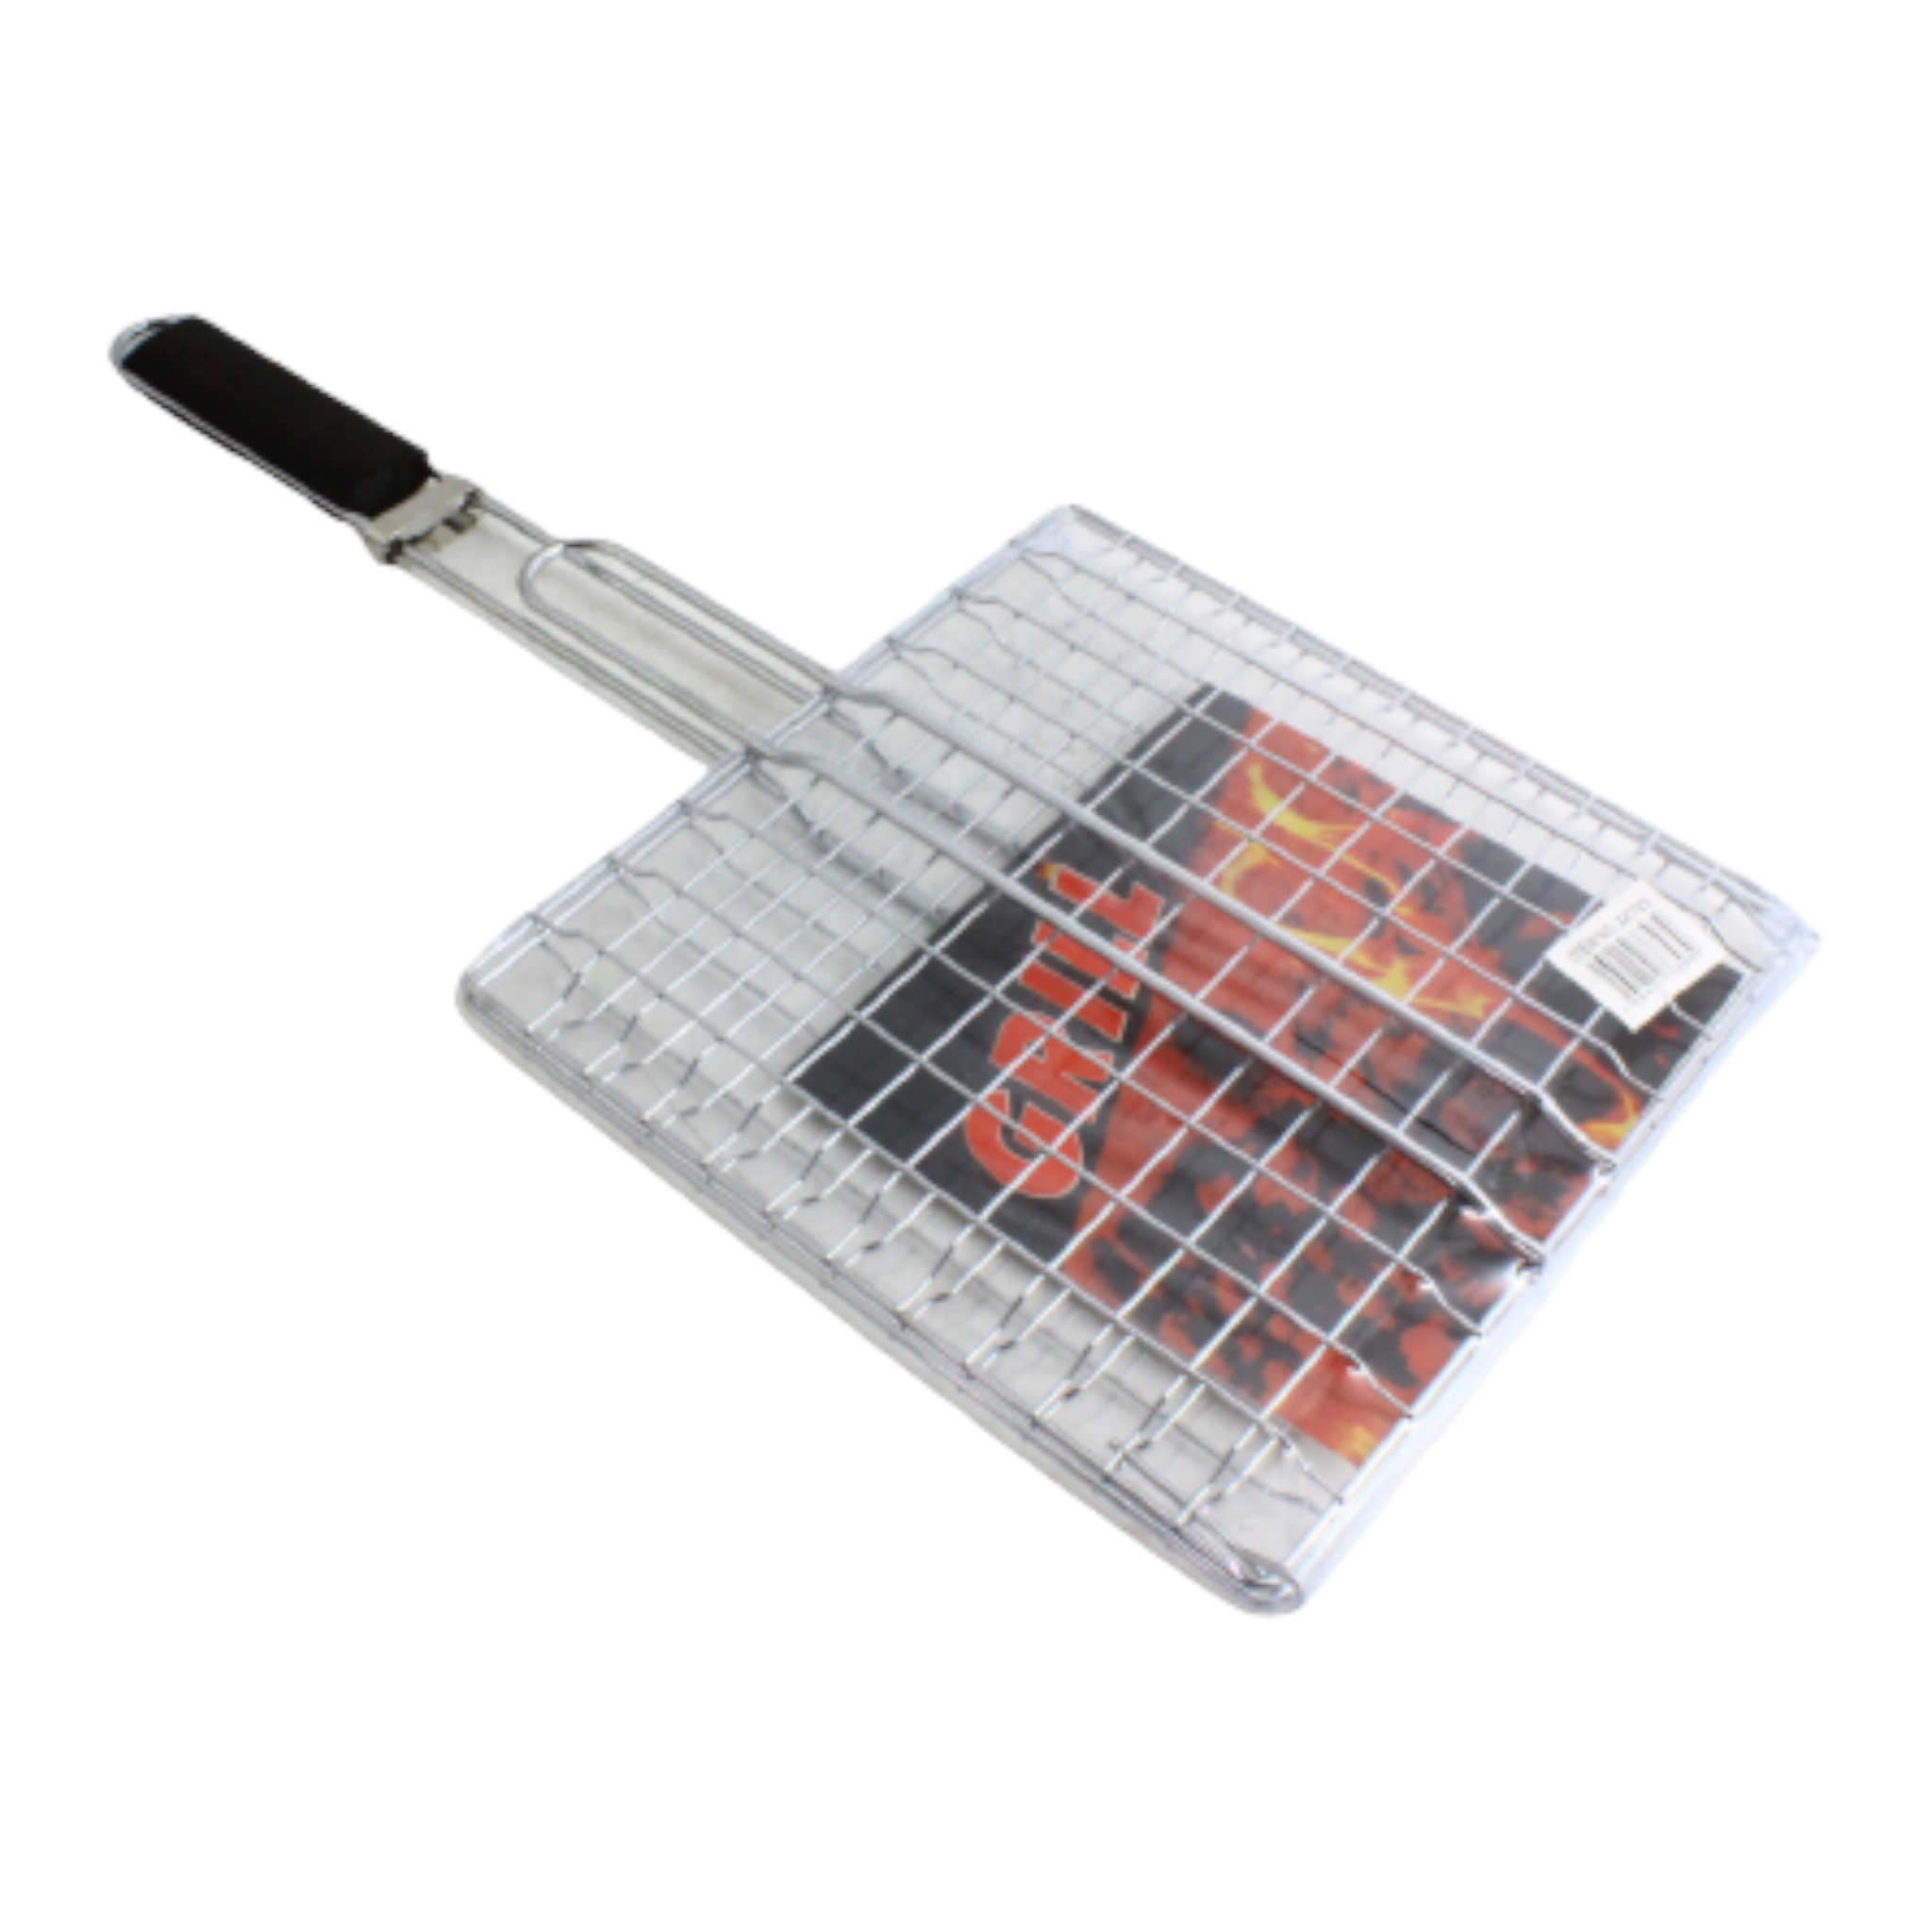 Braai Grill Grid Square Silver Stainless Steel XK793